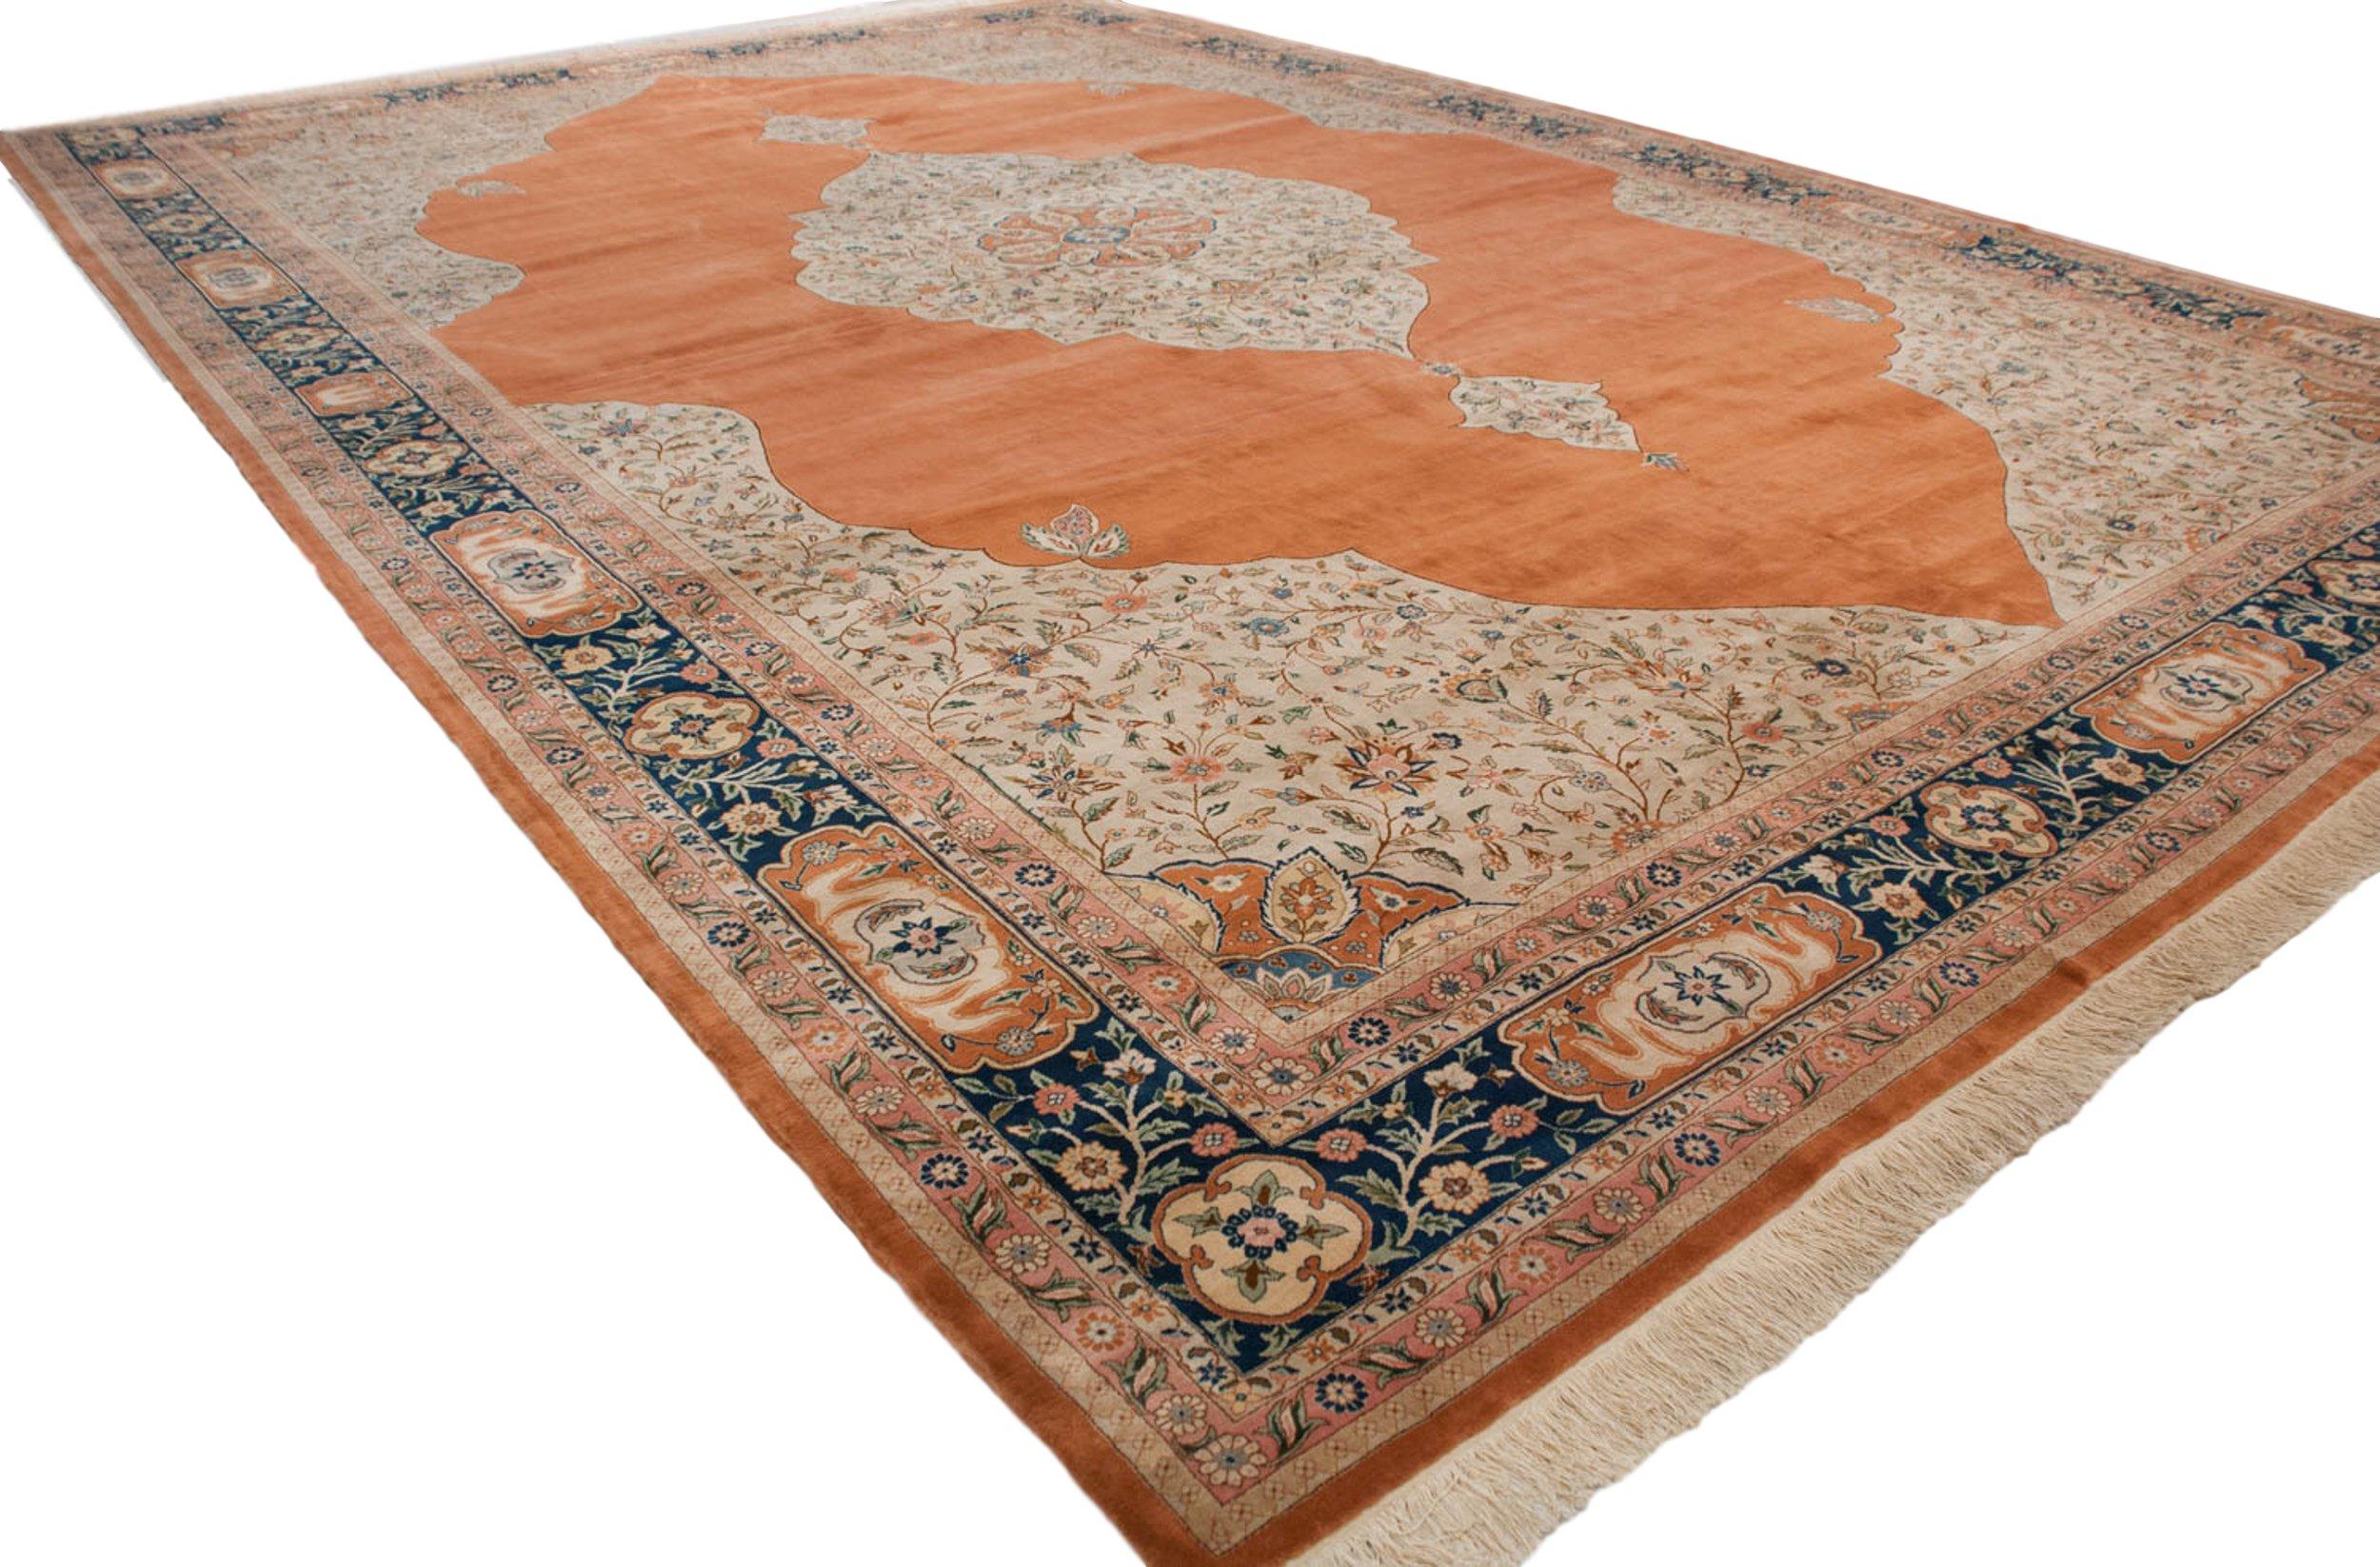 :: Tremendous scale and proportion in a classic Tabriz design, bearing large center medallion with roundel interior main medallion, surrounded by vinery, buds, blossoms, and more. Main field in a beautifully abrashed range in the orange family, with